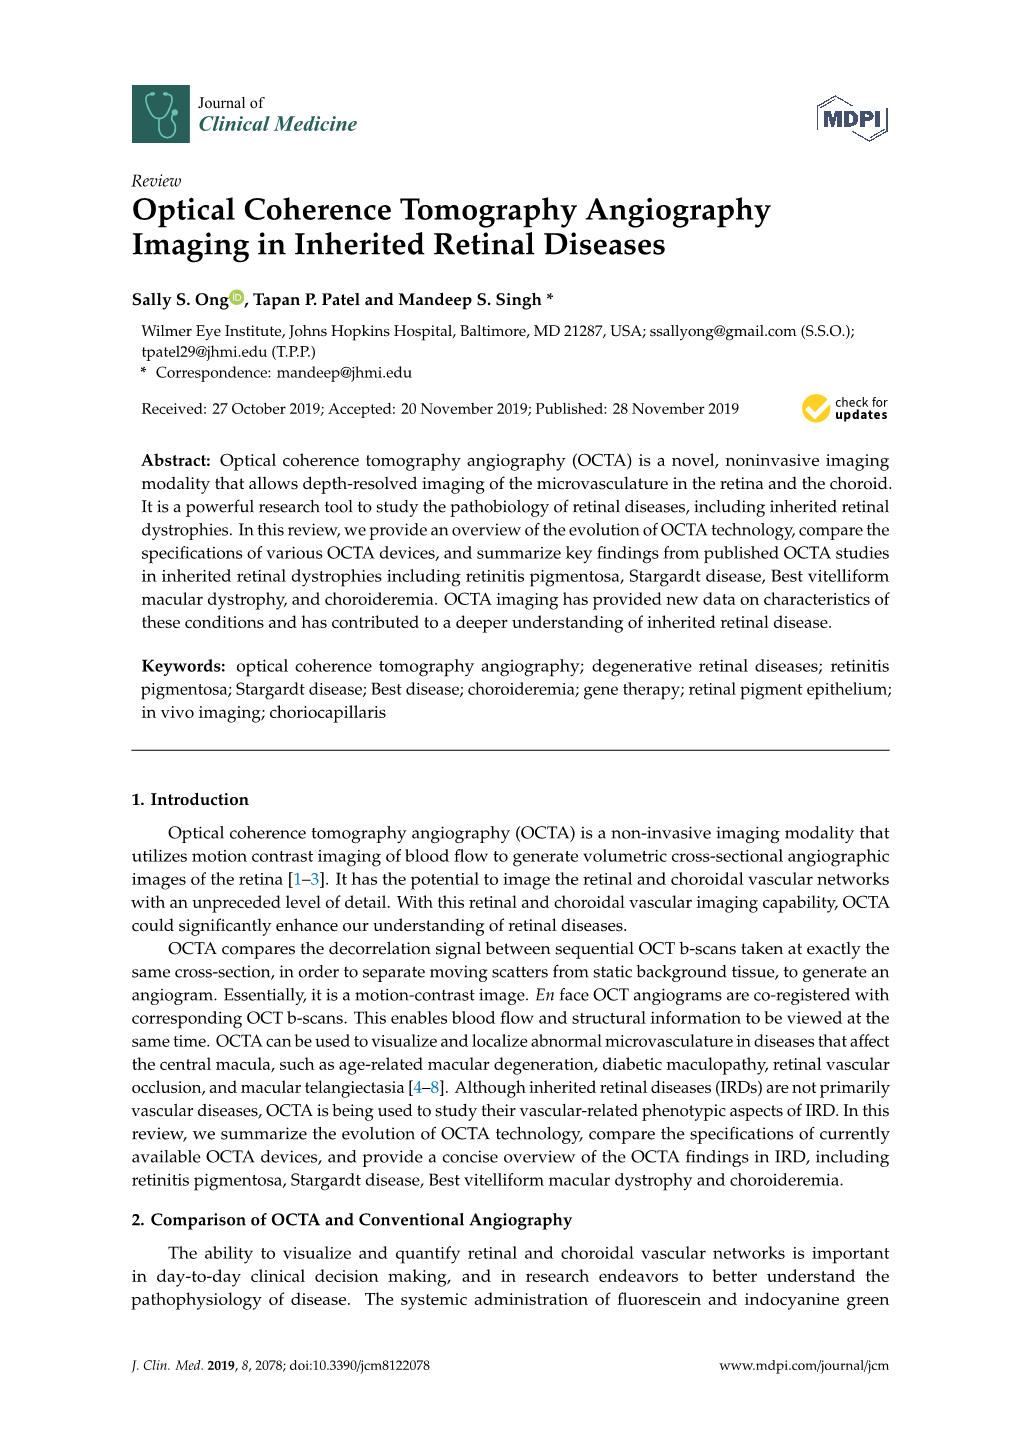 Optical Coherence Tomography Angiography Imaging in Inherited Retinal Diseases